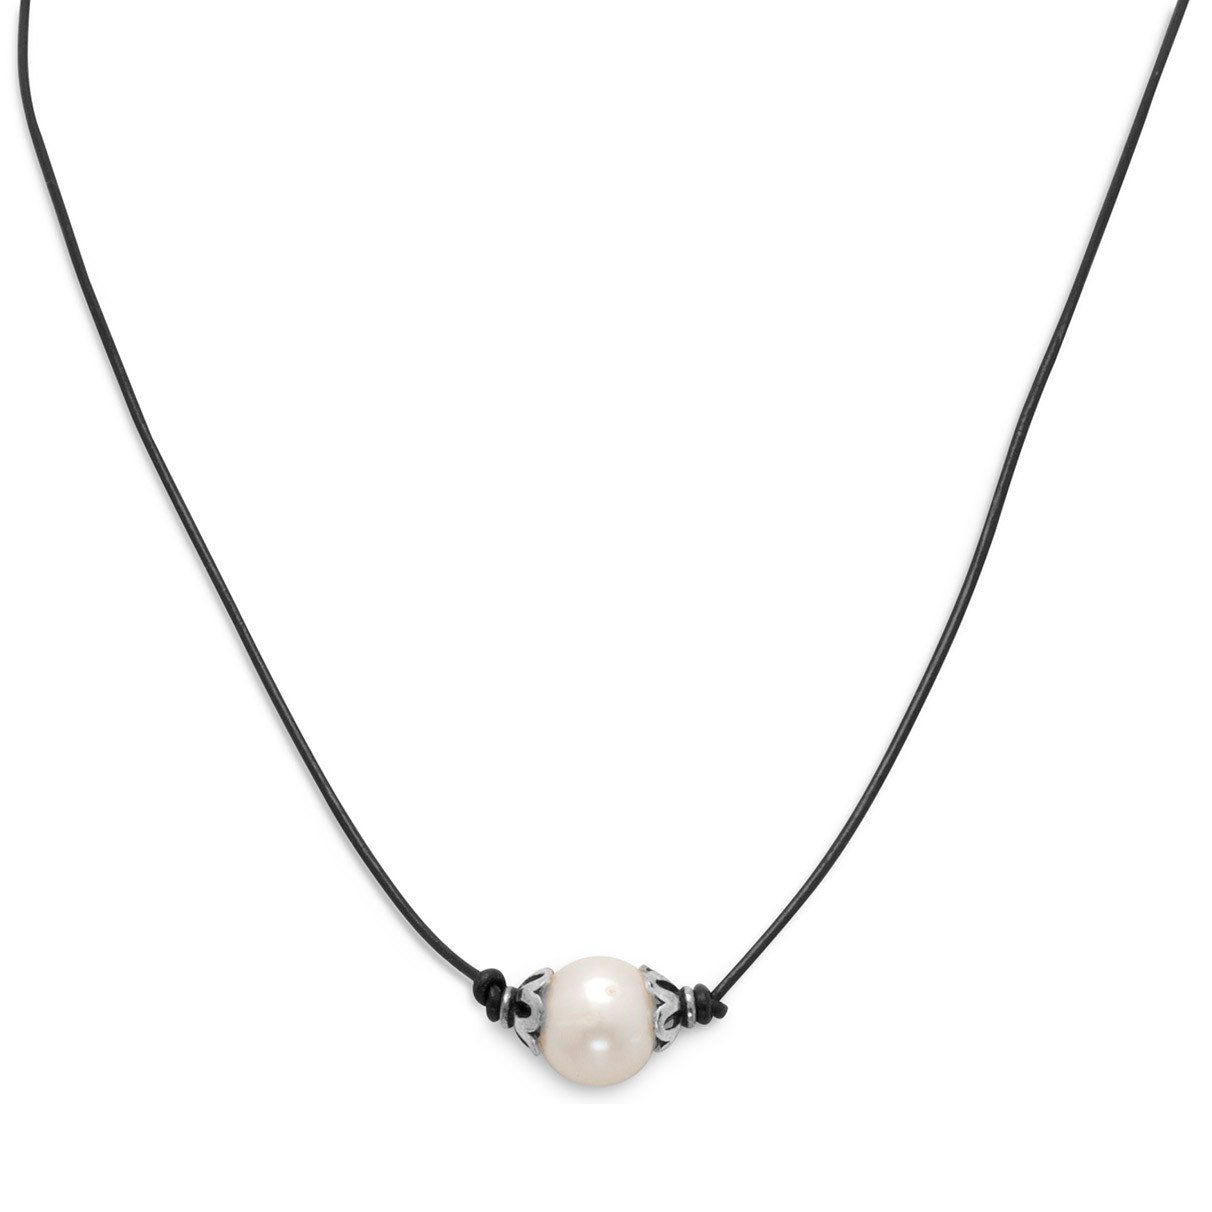 Sterling Silver 9mm White Freshwater Cultured Pearl Black Leather Choker Necklace 16" + Polishing Cloth (SKU: SS-CK1002)